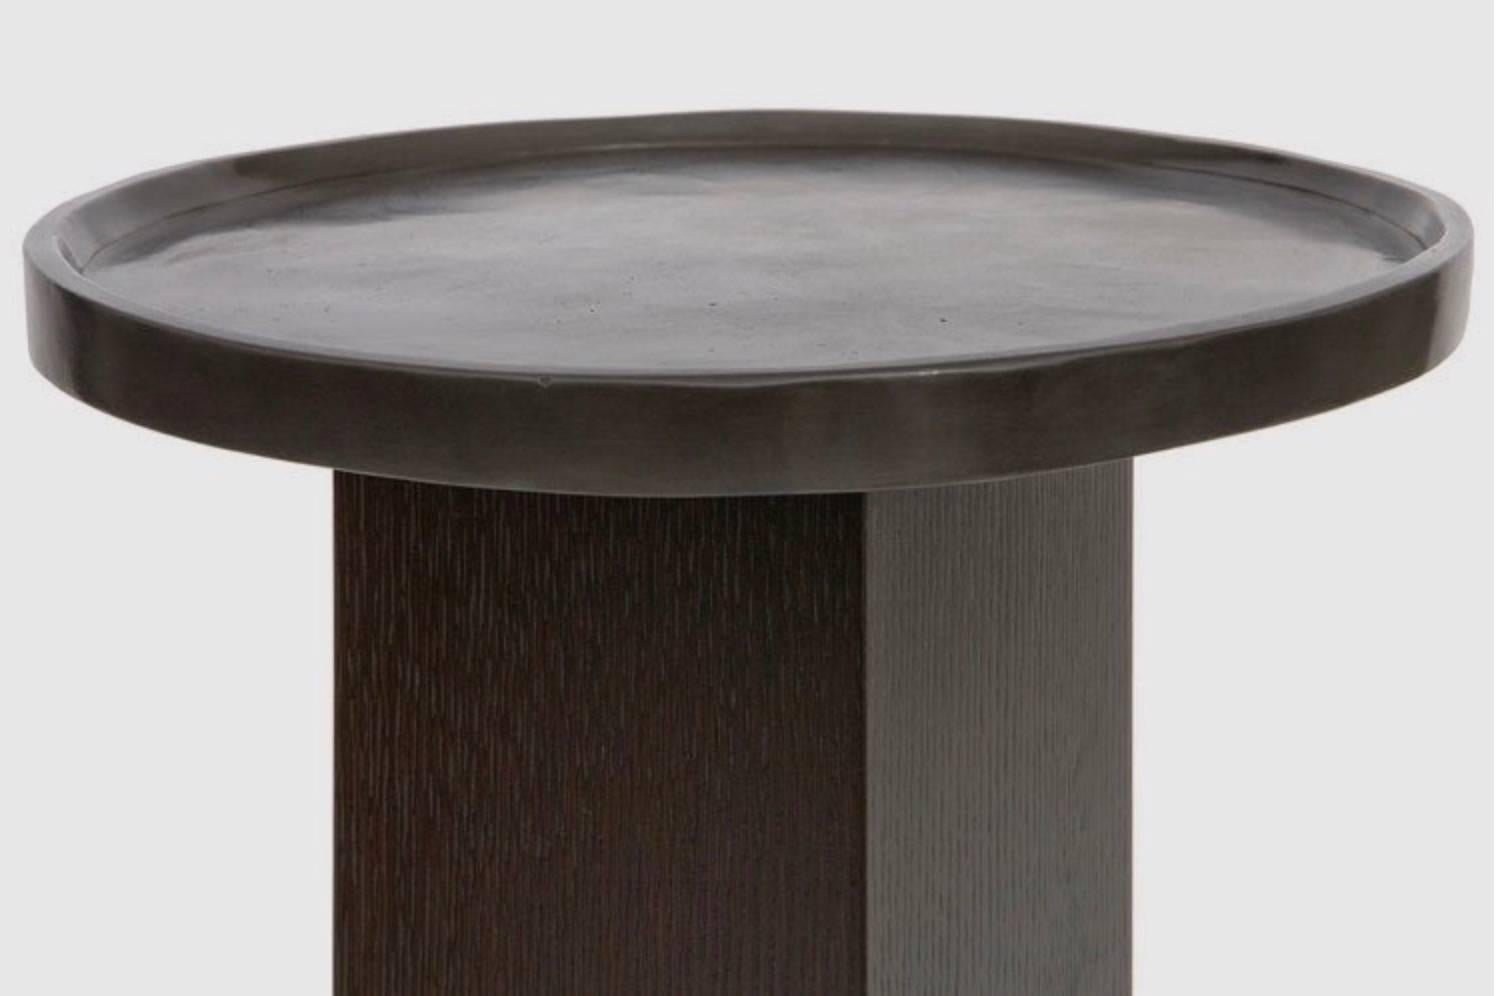 The sturdy rift-sawn oak pedestal supports a functional cast-bronze tray finished with an antiqued patina in this stylish yet sensible accent table. Use it in a living room to display decorative items such as sculptures or busts and plant-filled